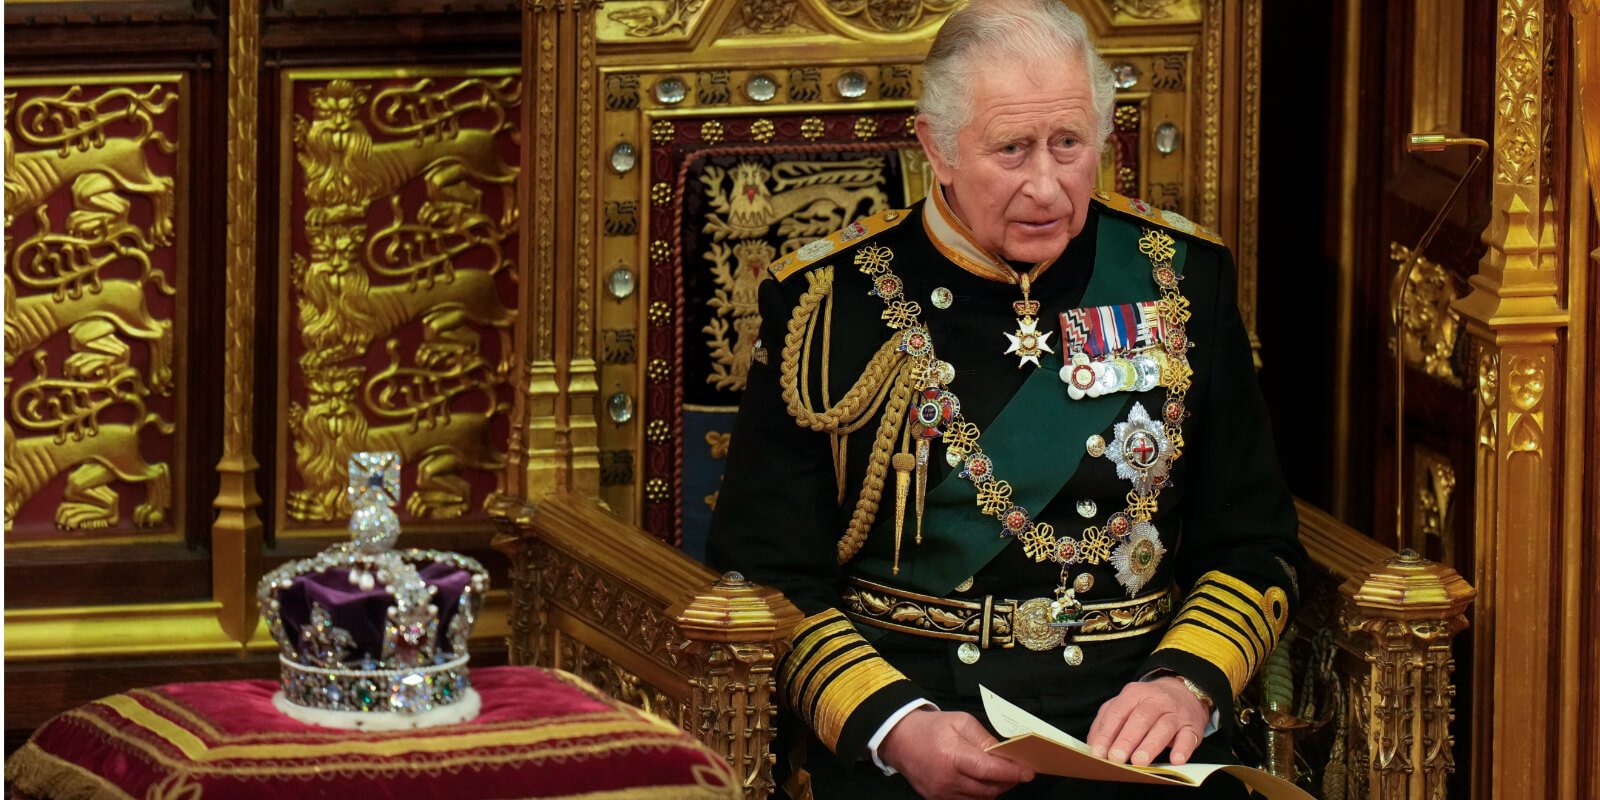 King Charles III and the Imperial State Crown at the opening of Parliament.